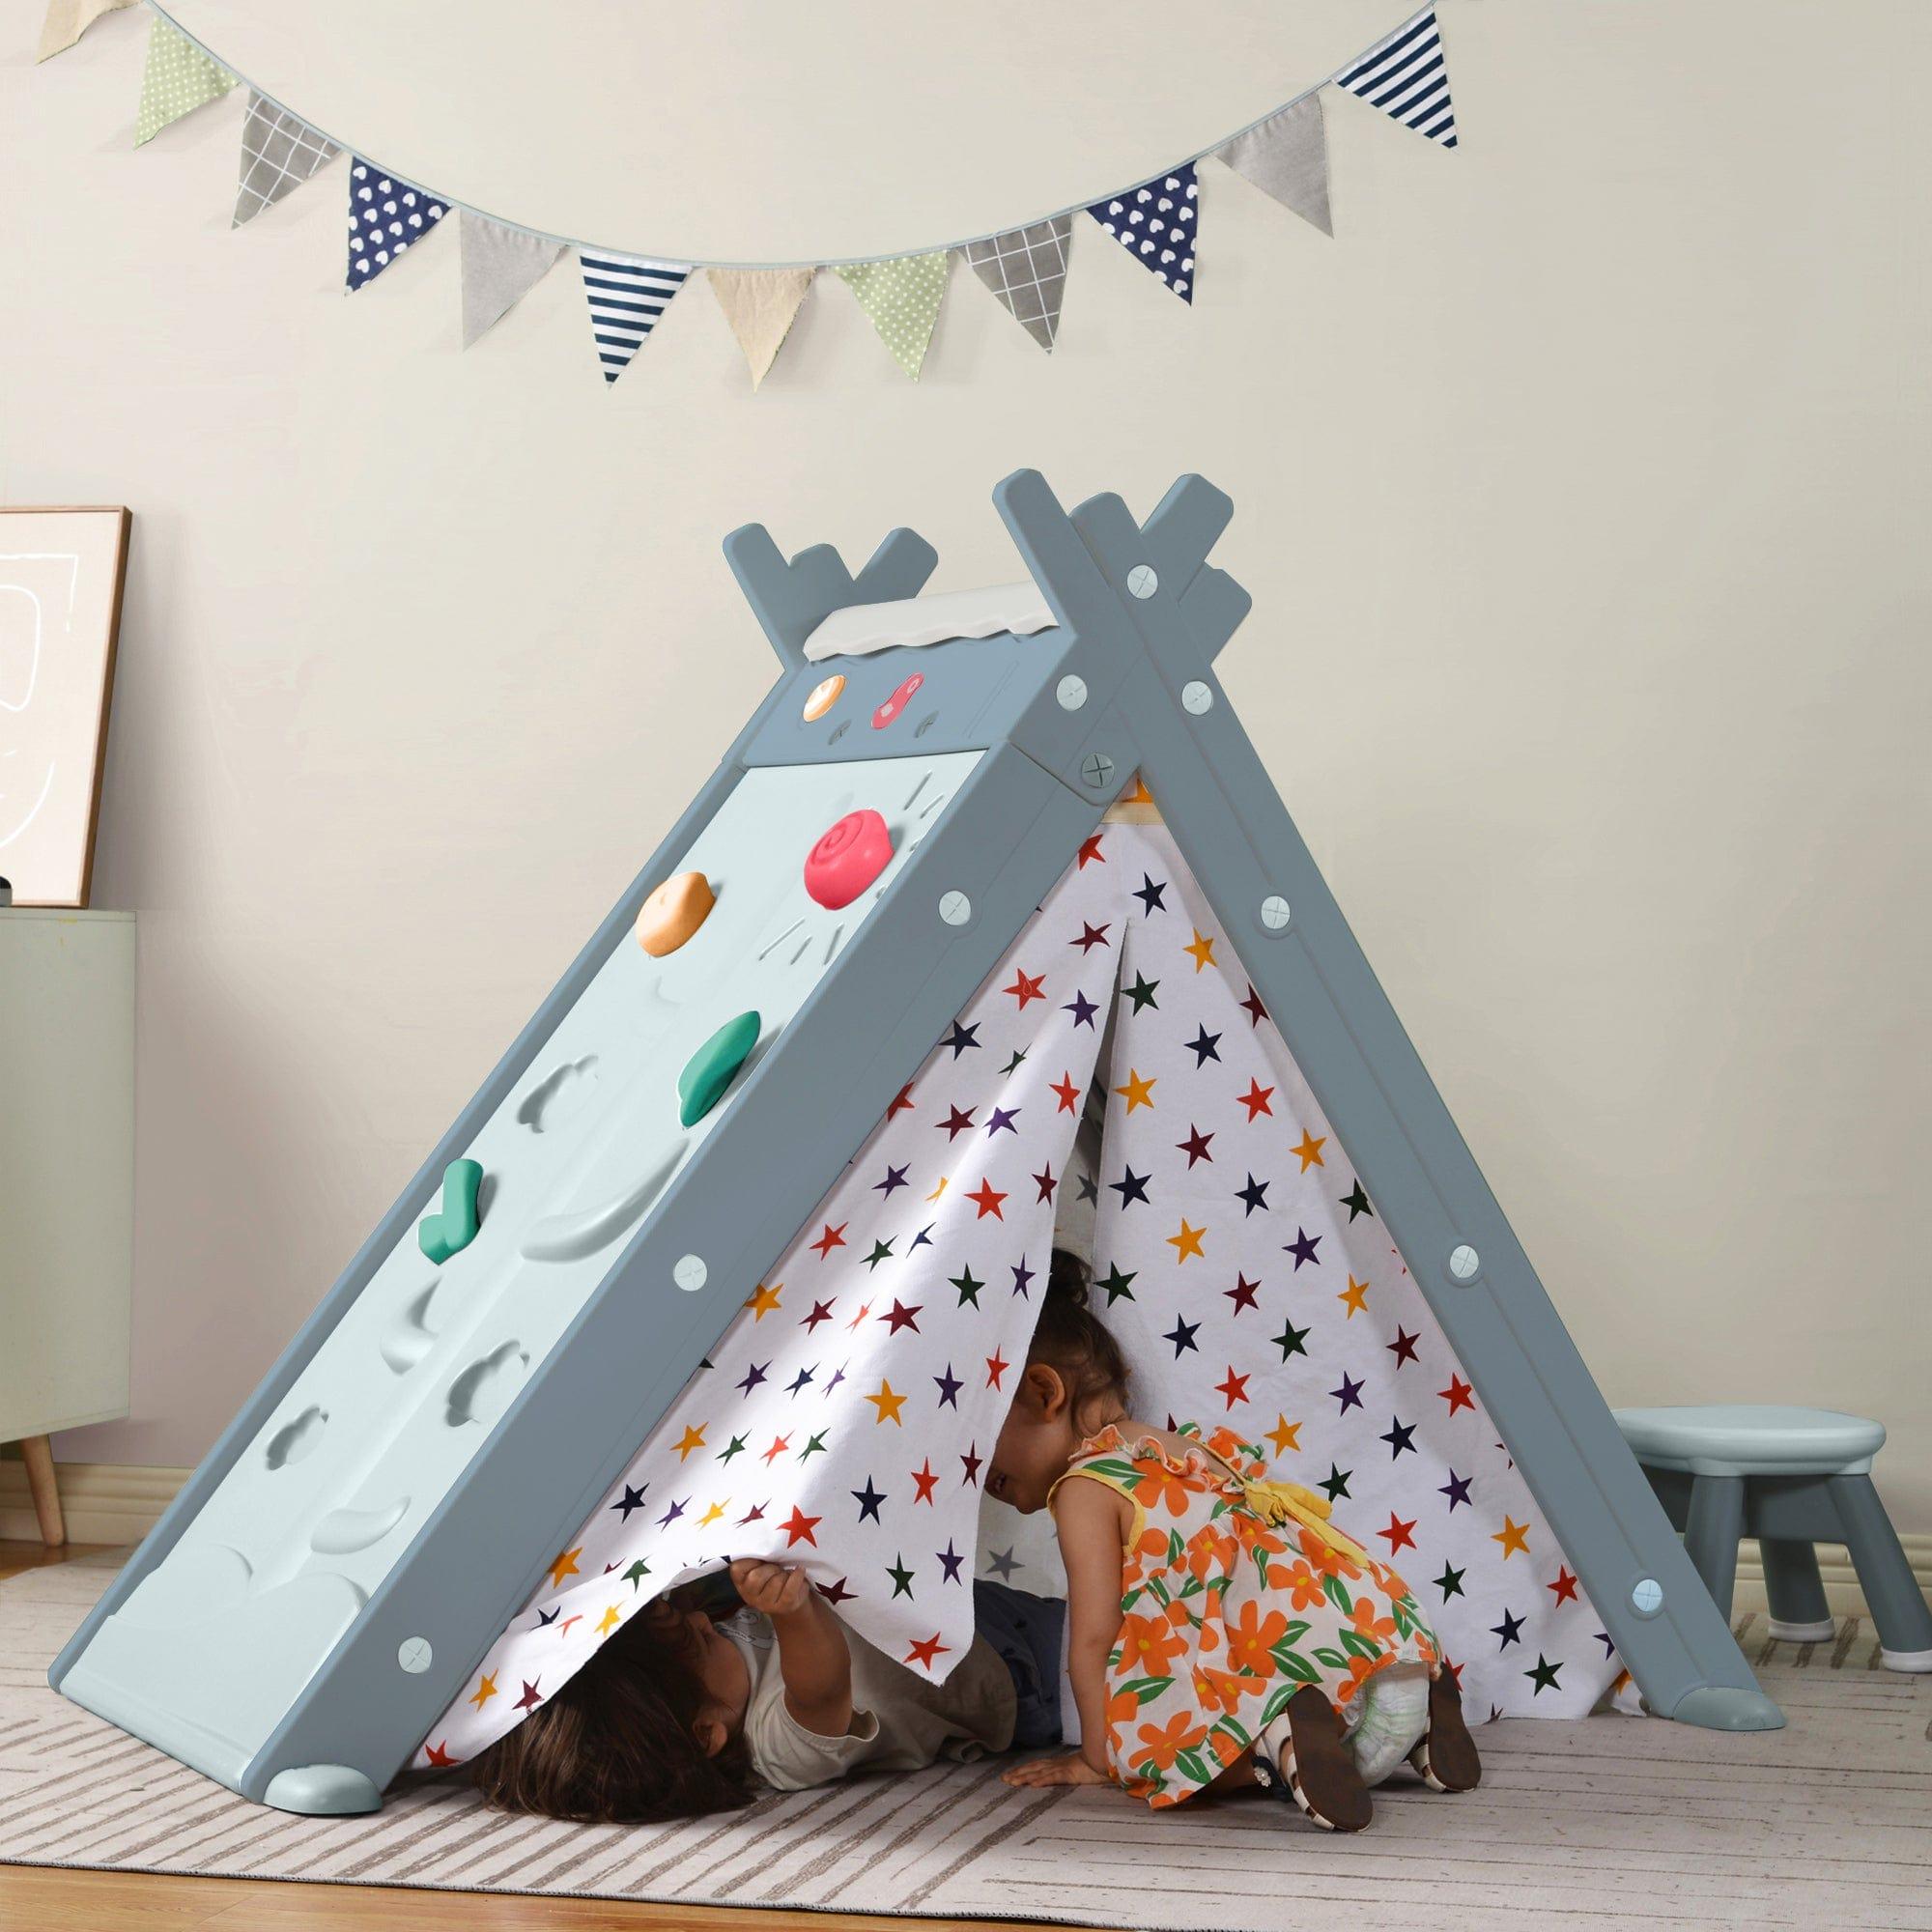 Shop Kids Play Tent - 4 in 1 Teepee Tent with Stool and Climber, Foldable Playhouse Tent for Boys & Girls Mademoiselle Home Decor